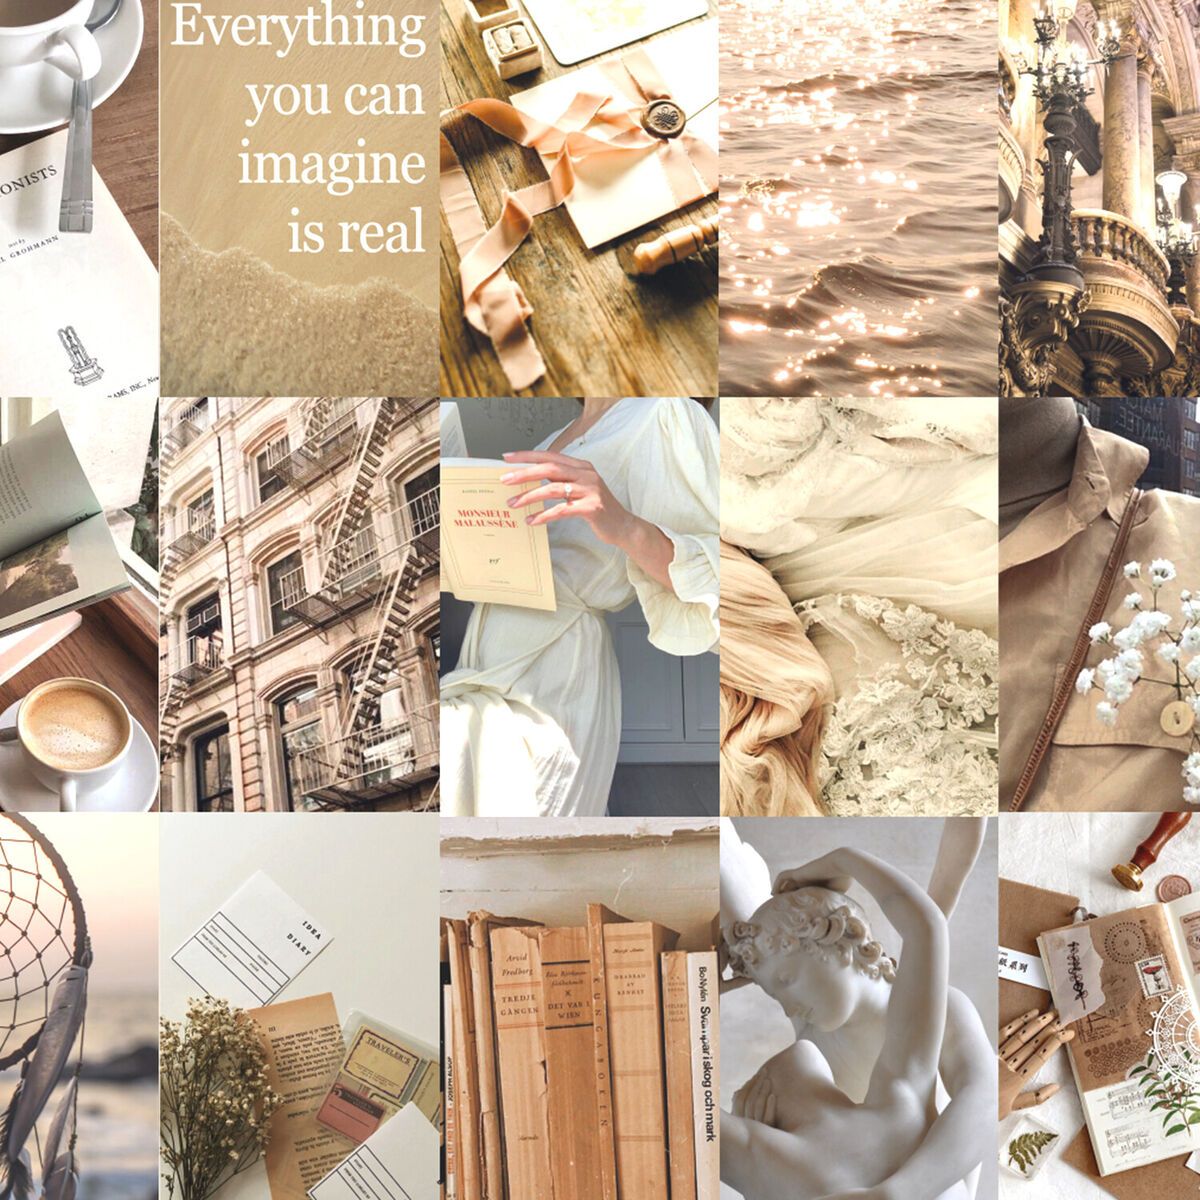 A collage of photos including books, a city, a beach, and a coffee cup. - Light academia